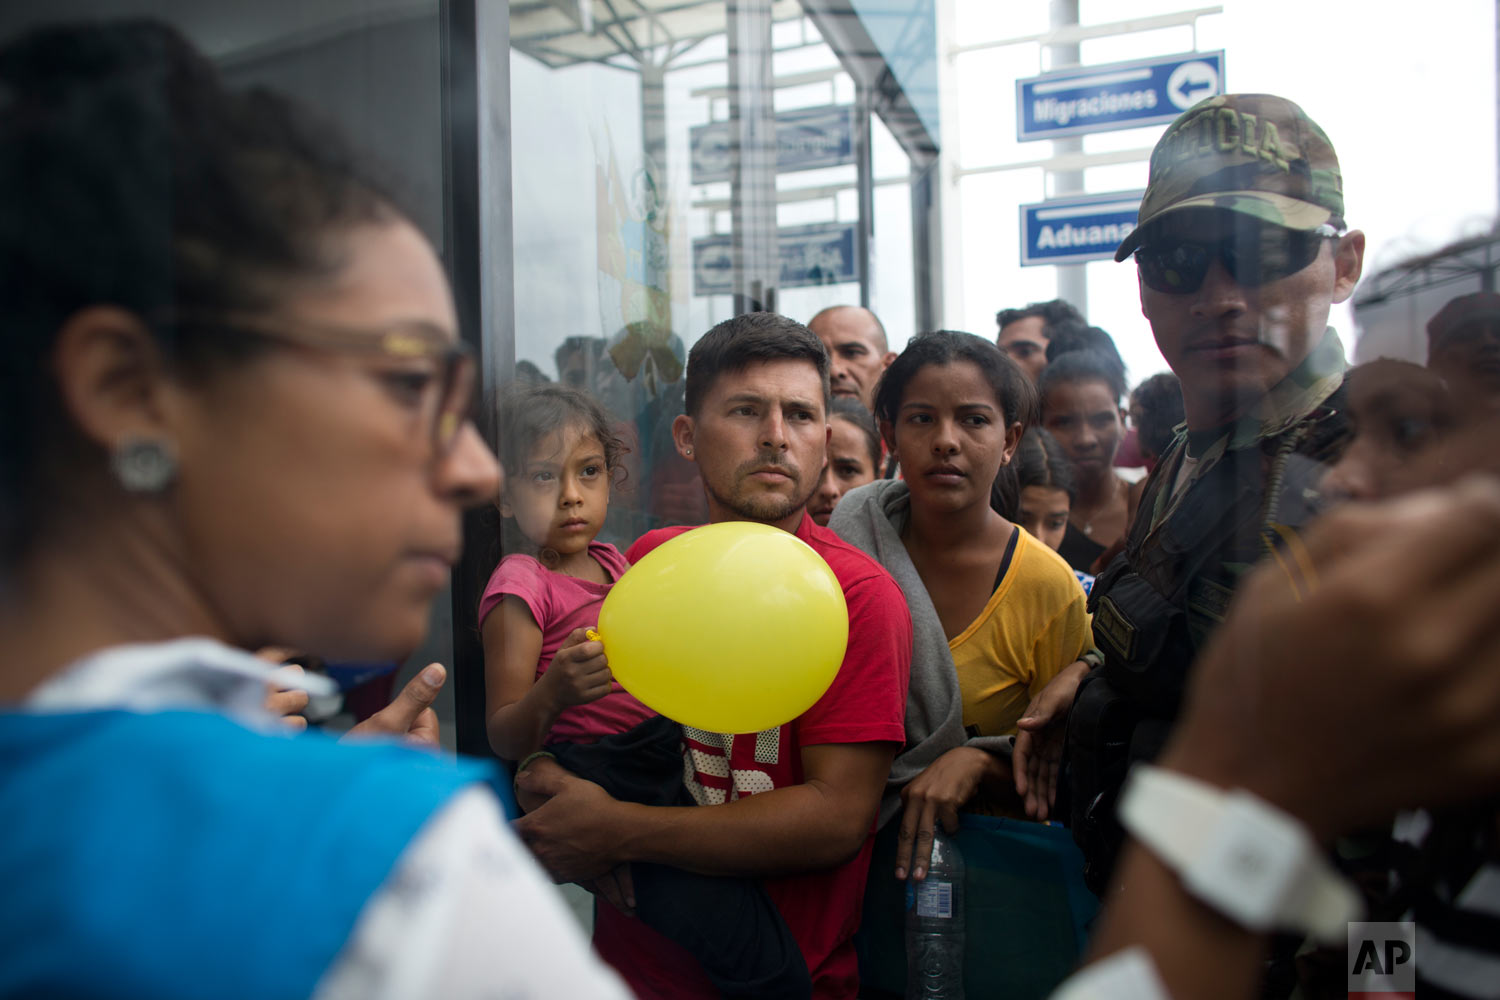  In this Sept. 6, 2018 photo, Venezuelans wait in line to be attended by Peruvian immigration officials in hopes of entering the country, in Tumbes, Peru. Many Venezuelans' final destination is Lima, Peru, a city where most believe they will have mor